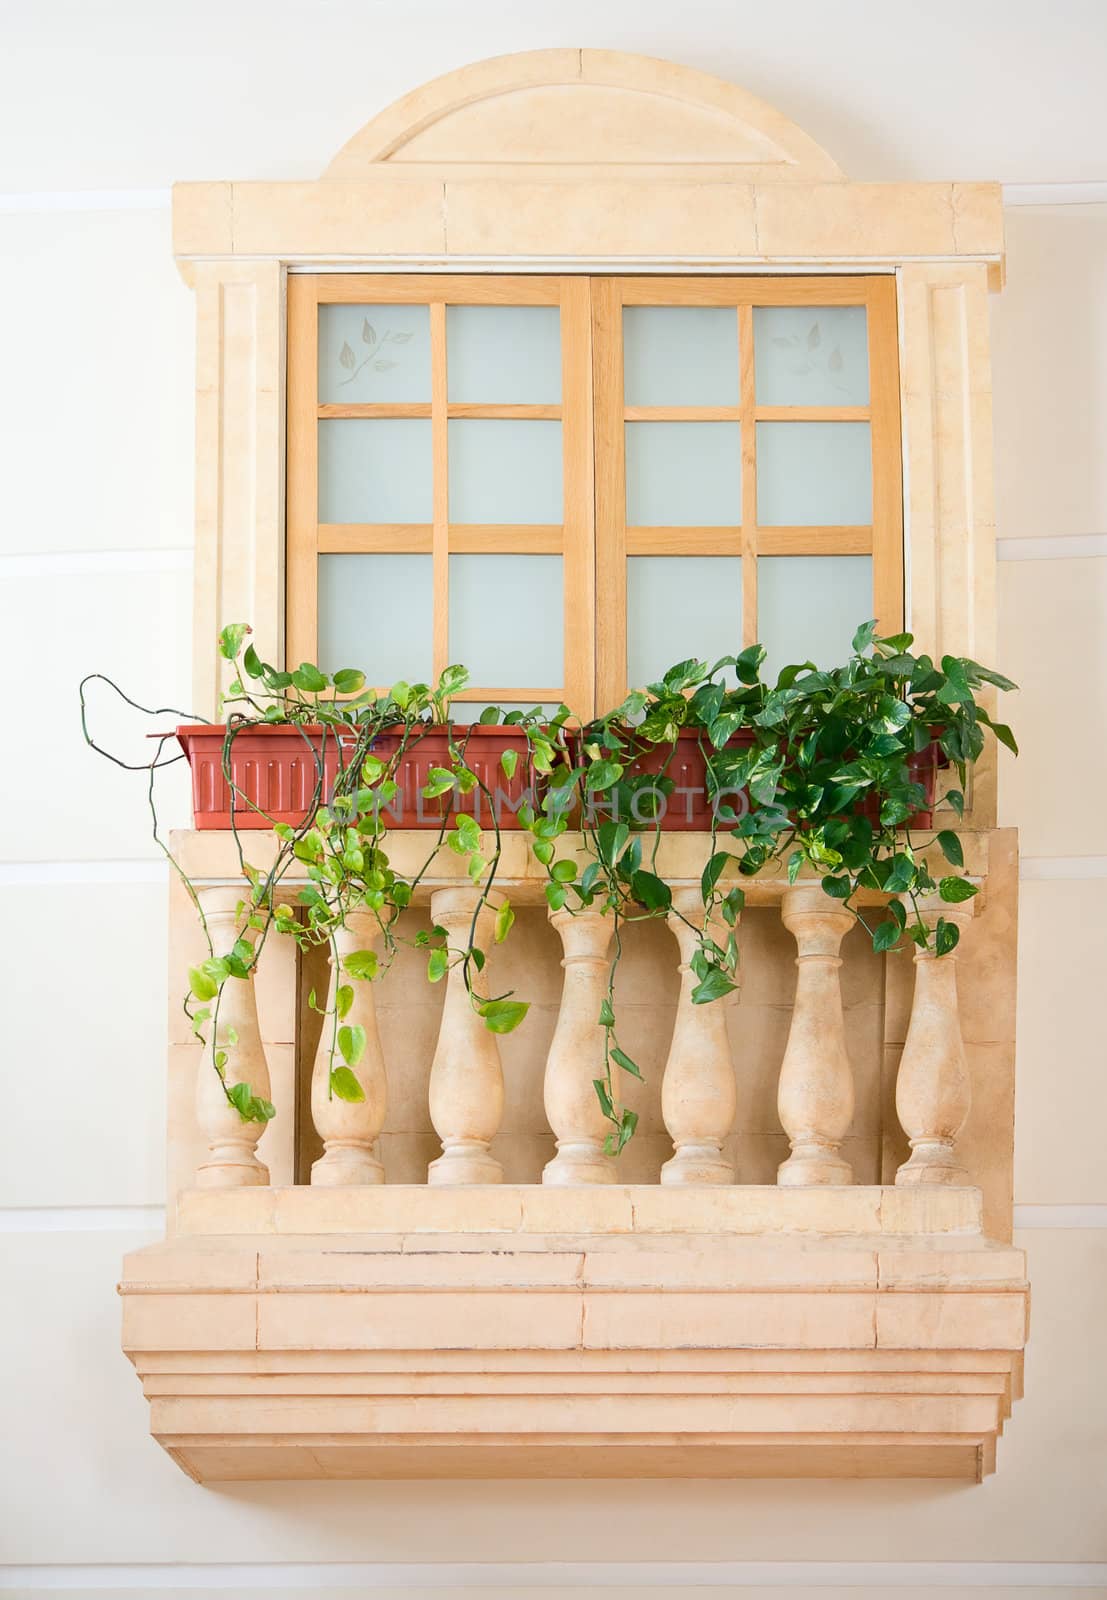 Unusual decorative balcony with columns and vases with flowers.